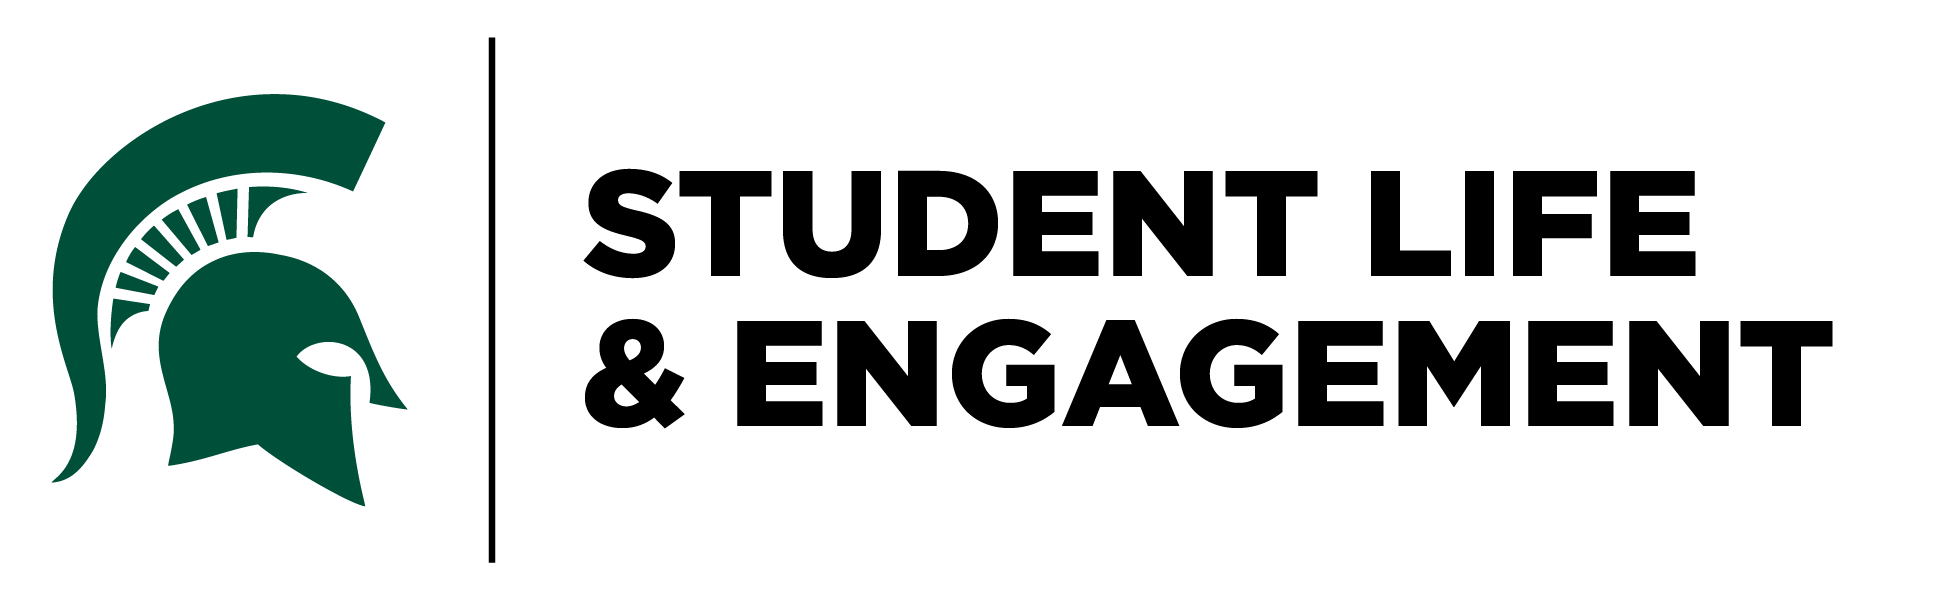 Green Spartan helmet with the text "Student Life and Engagment" on a white background